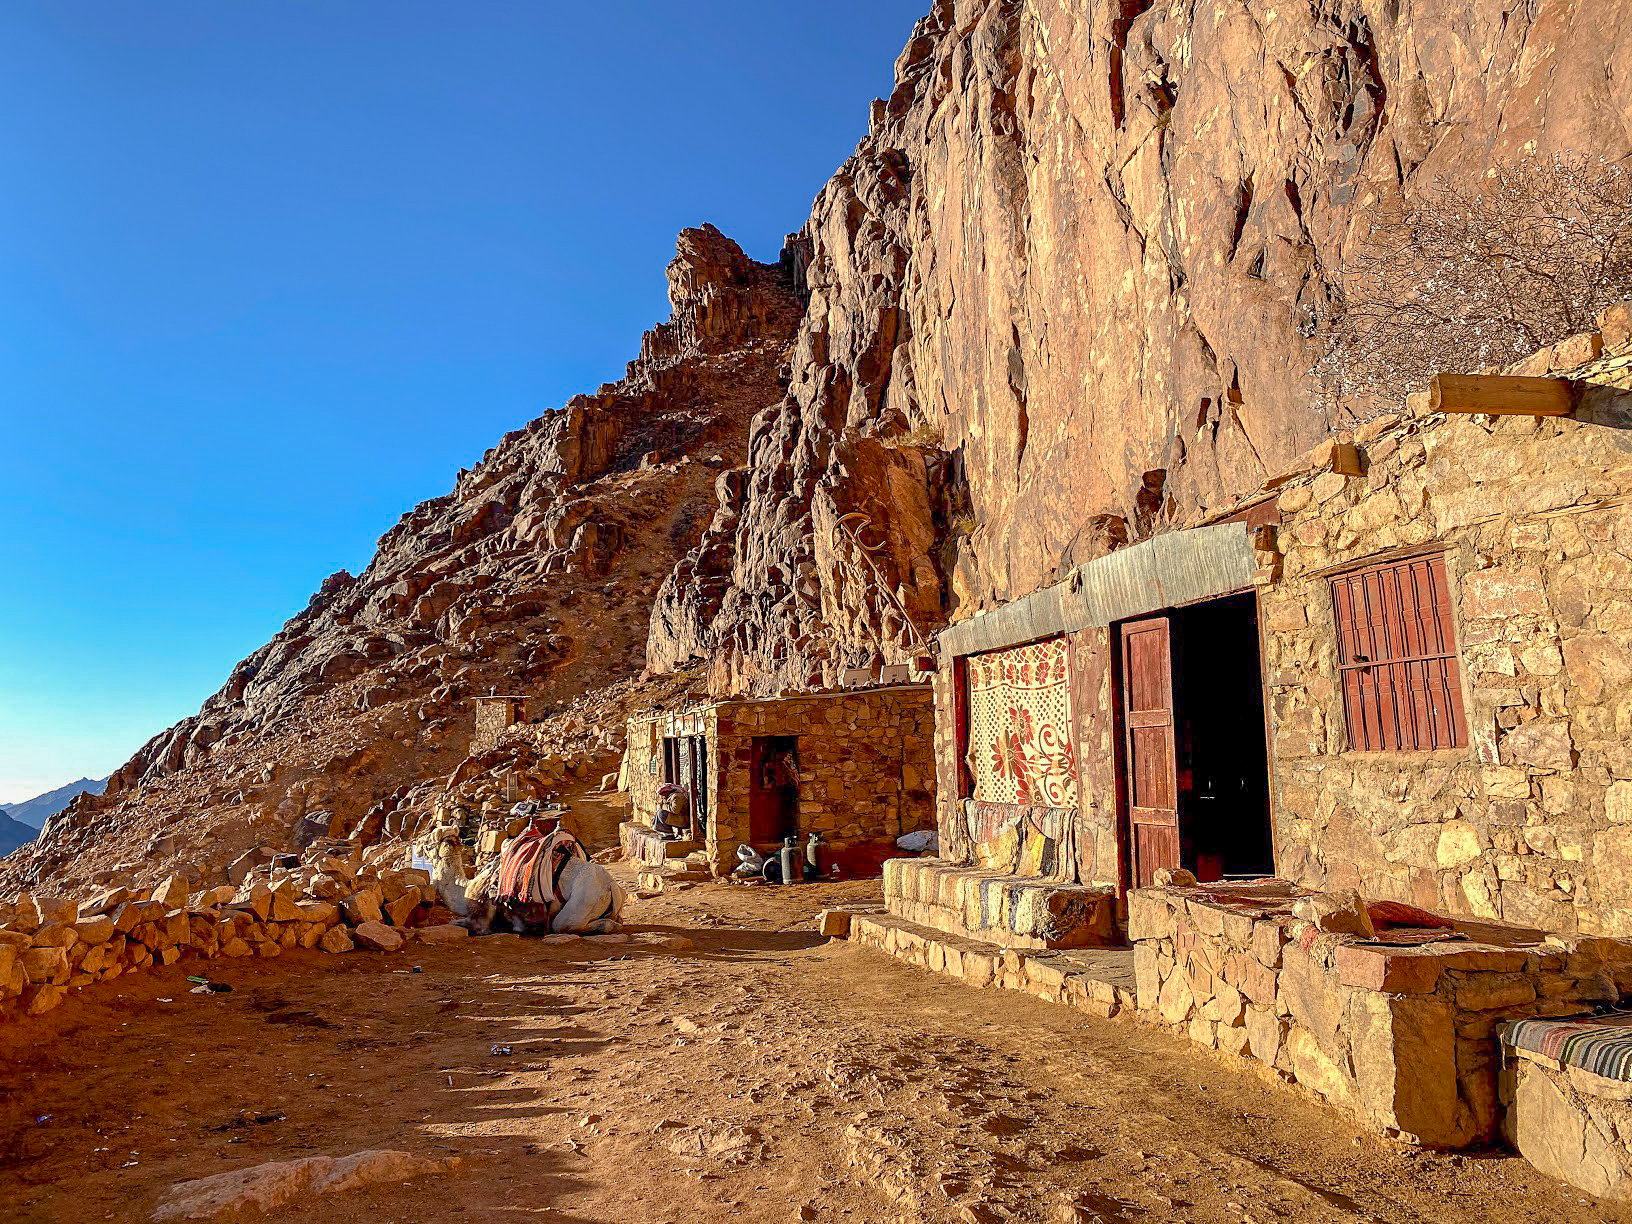 a stone shop in the side of Mount Sinai, Egypt against a clear blue sky